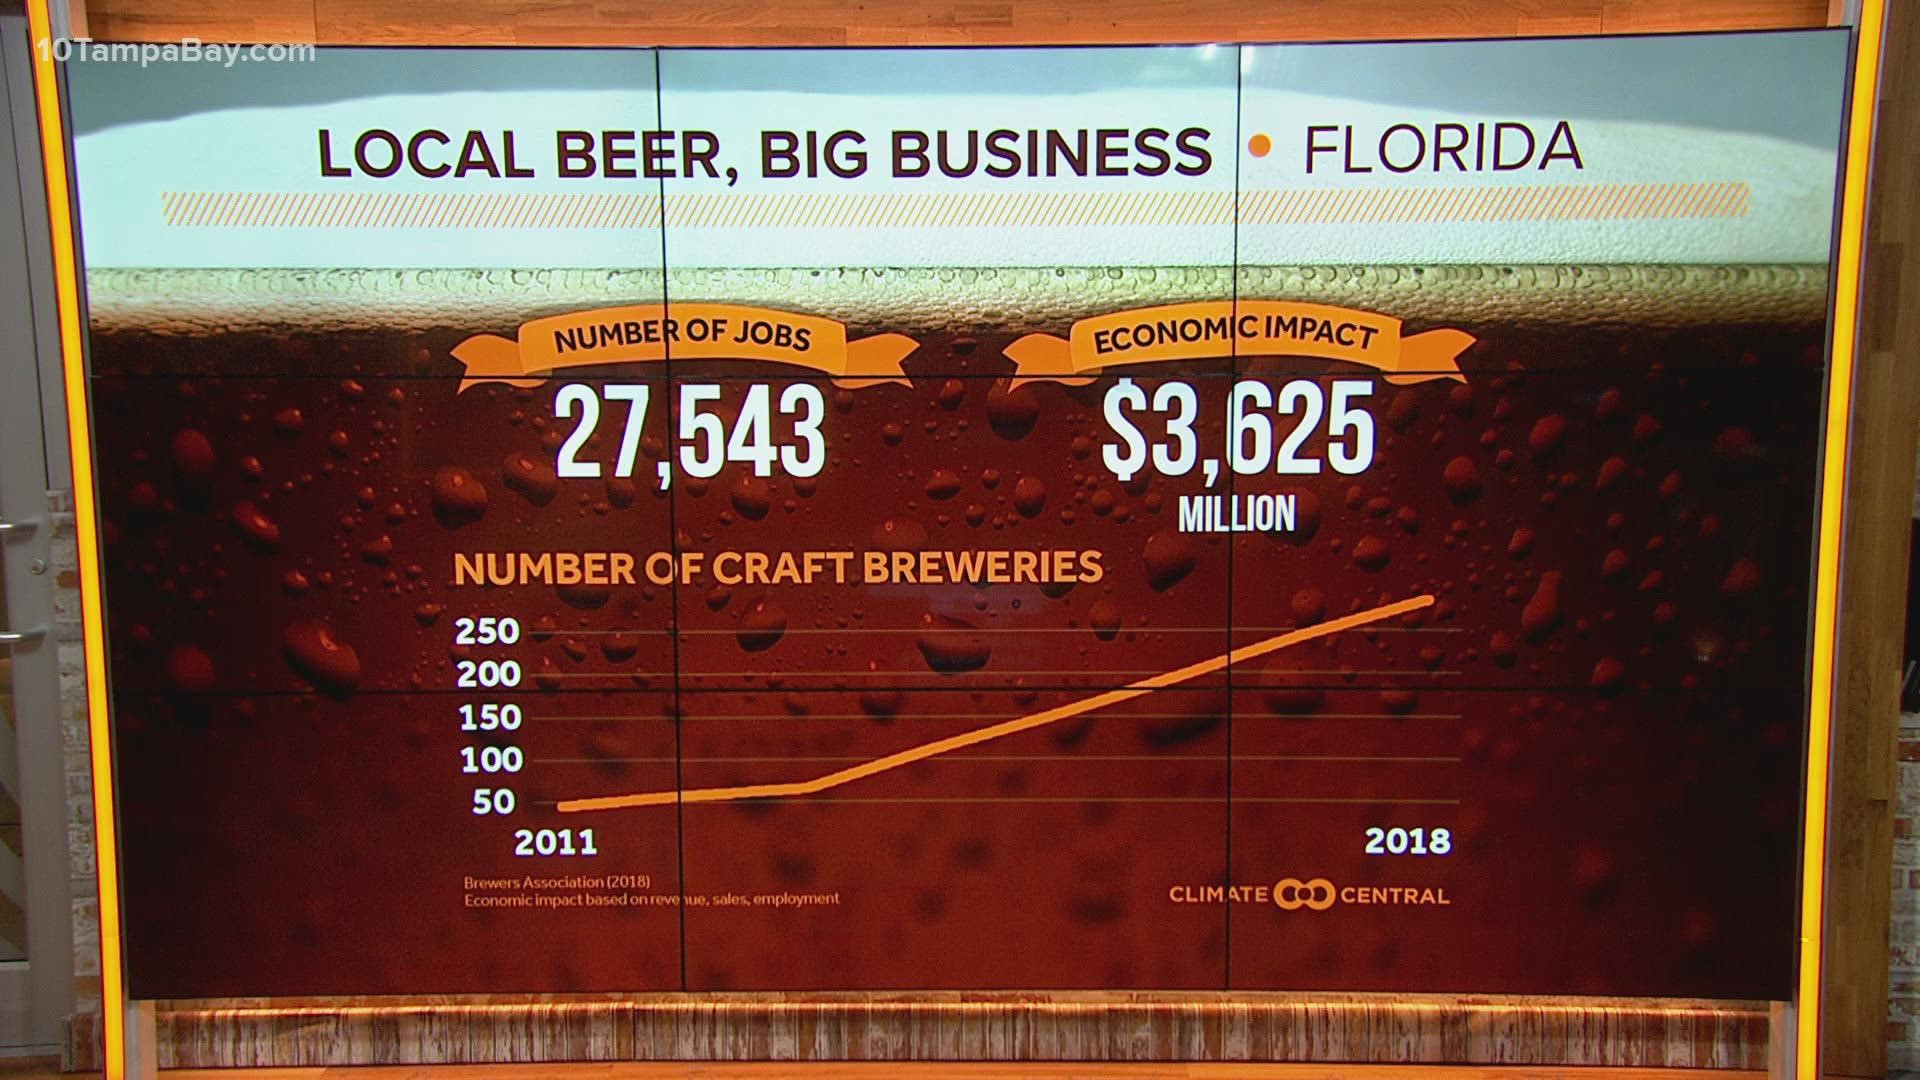 From water to barley crops, our changing climate is impacting the beer industry.